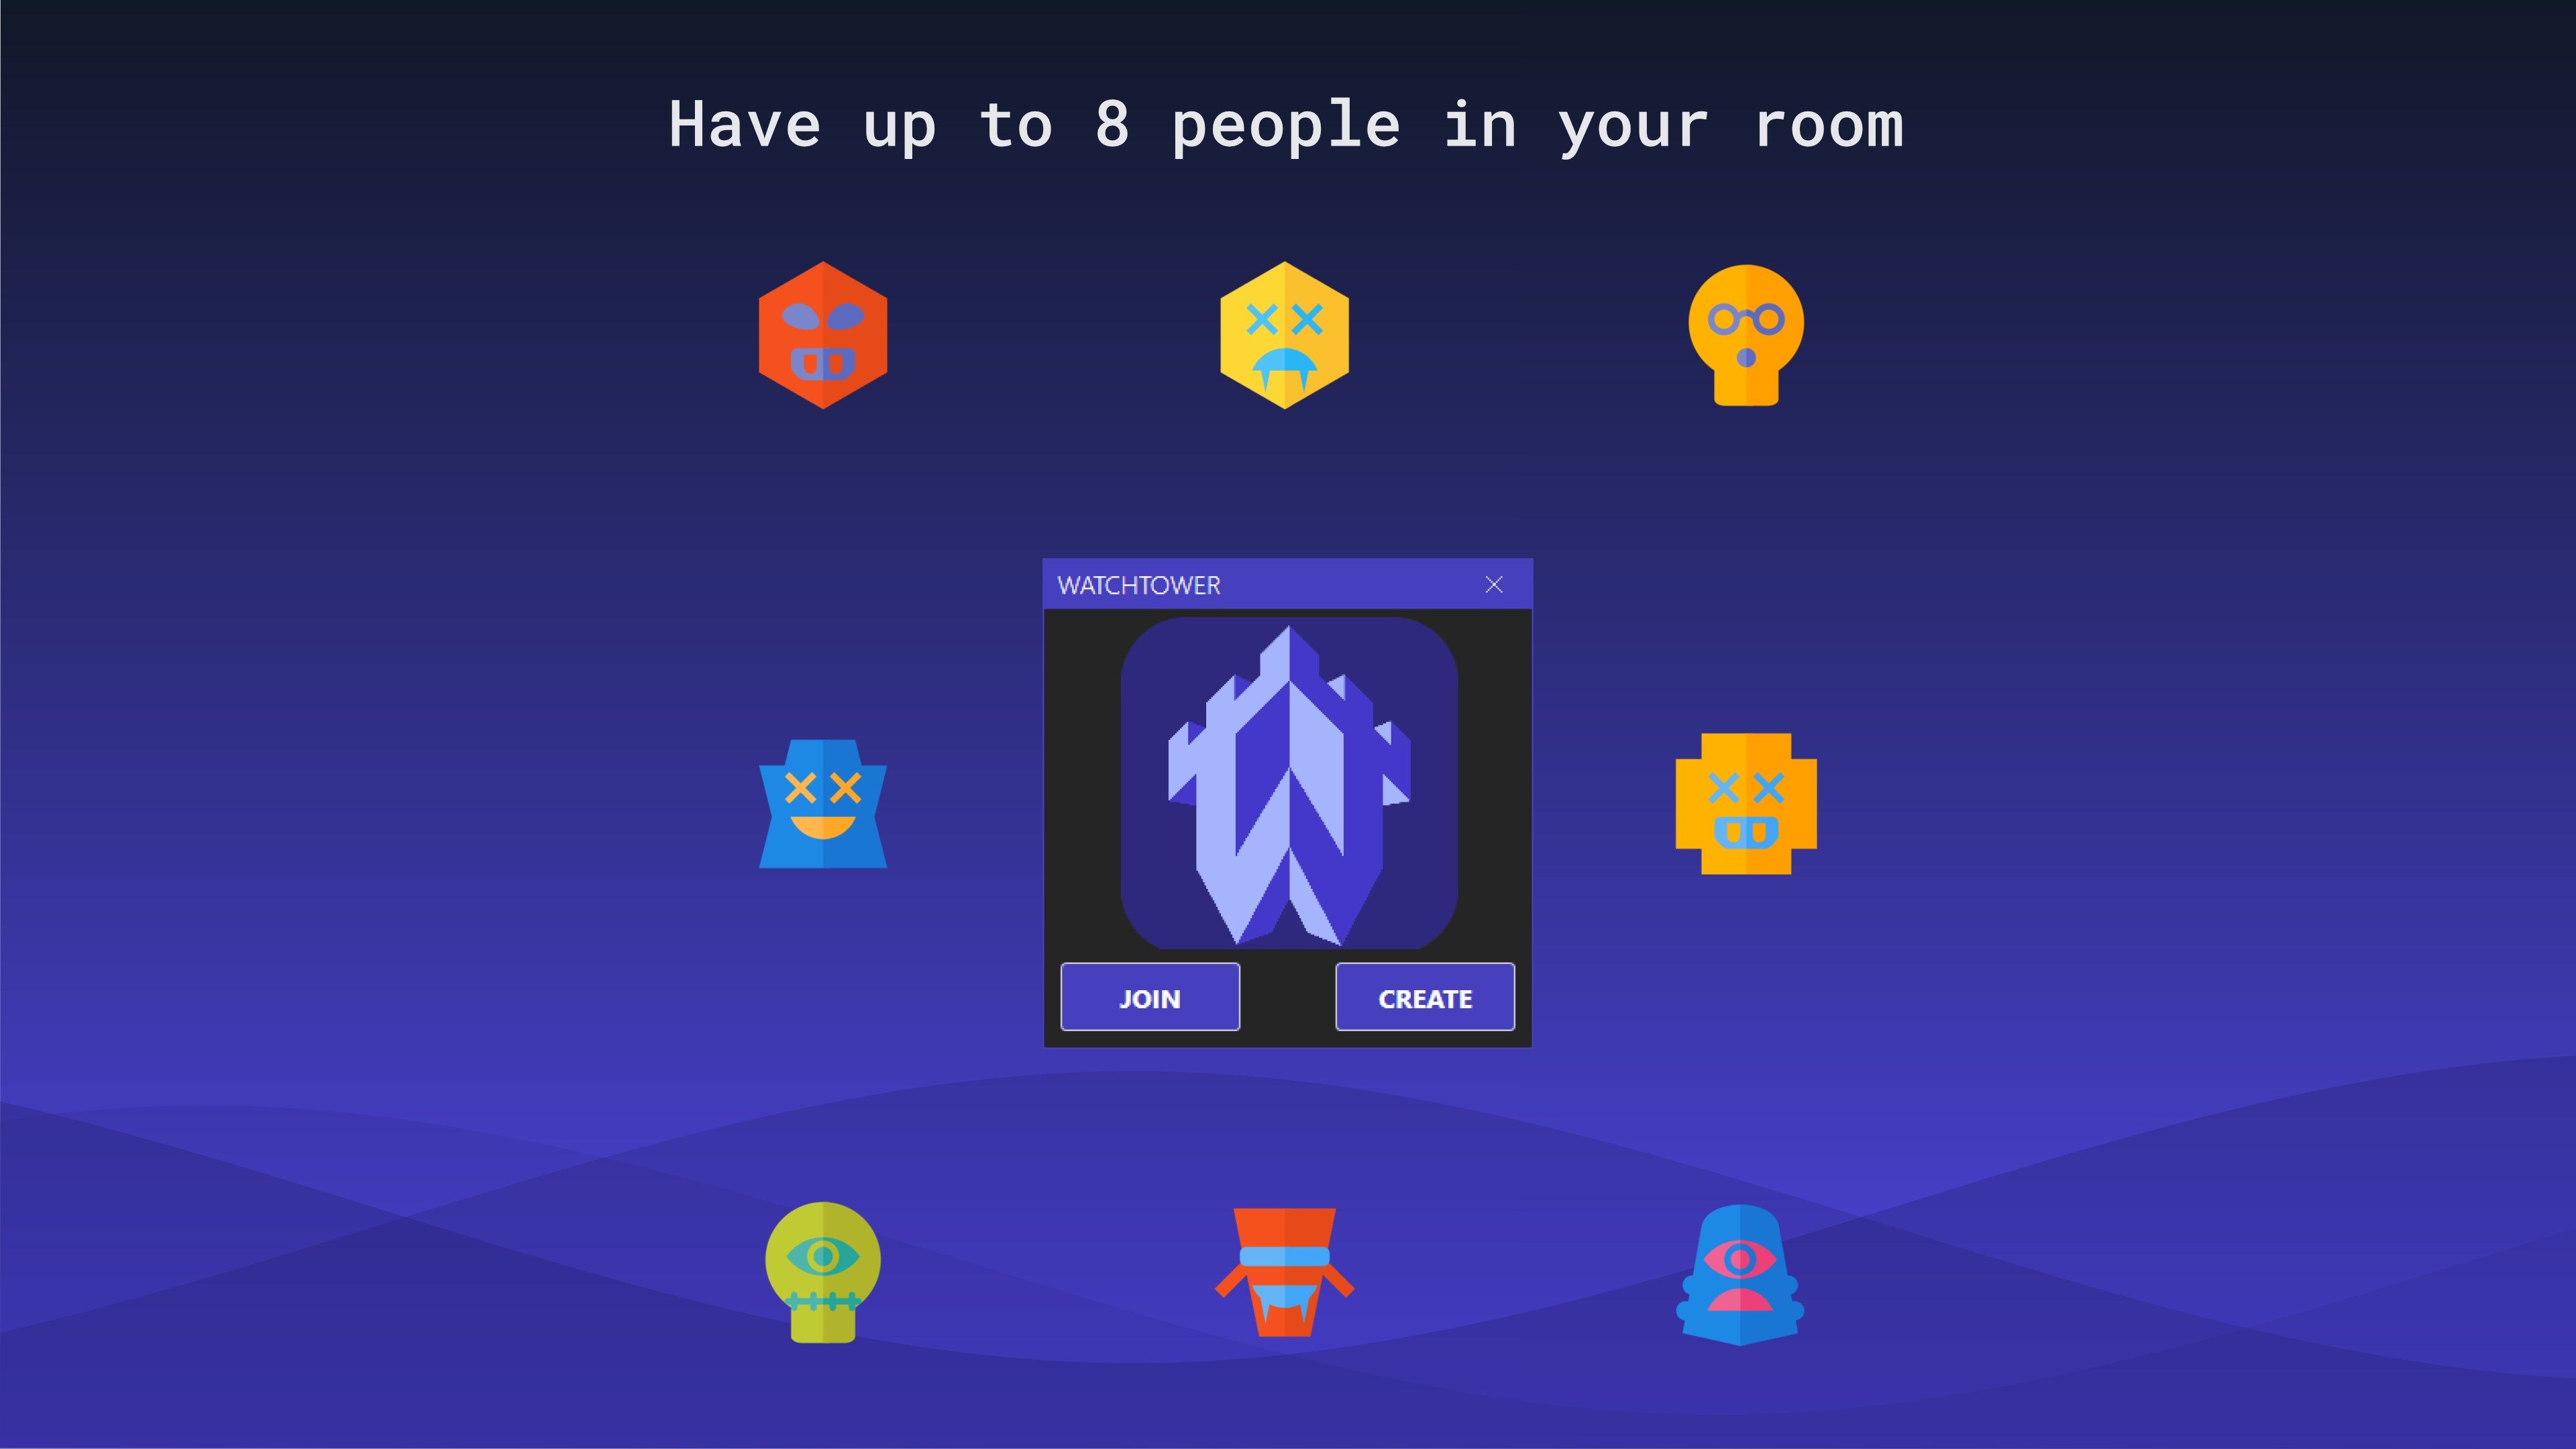 Have up to 8 people in your room